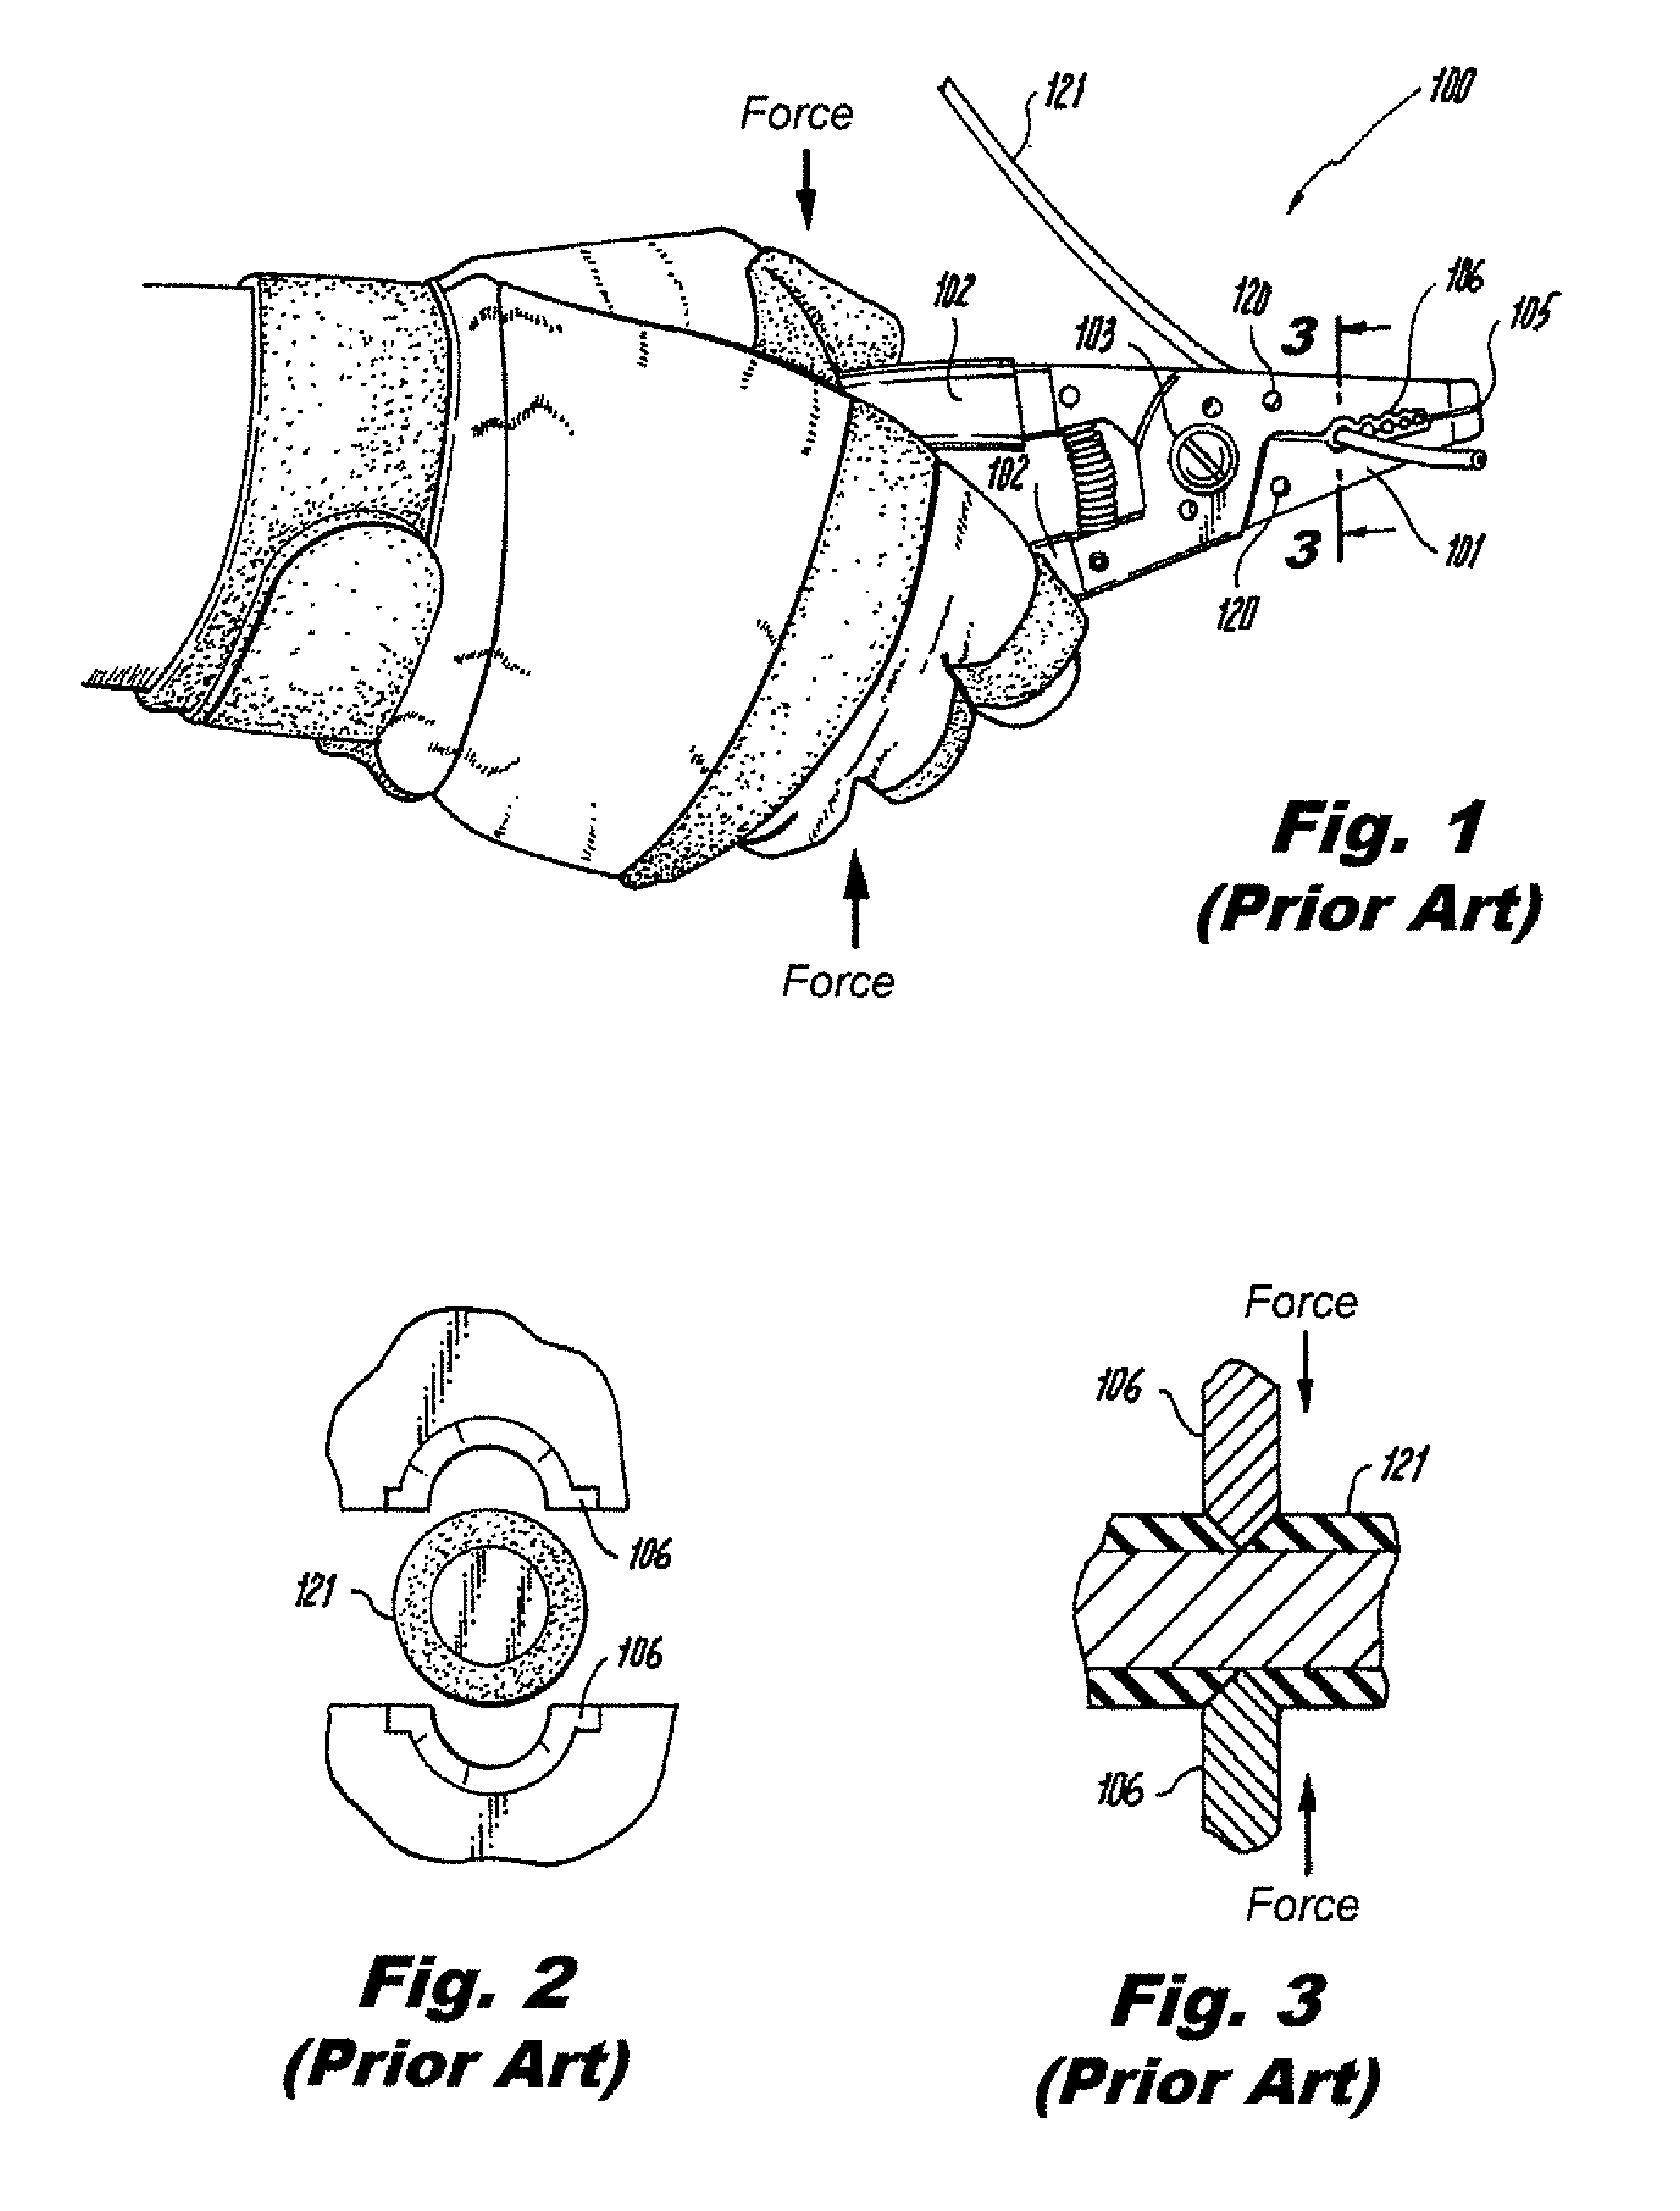 Multi-function wire stripping hand tool and kit and method for using same